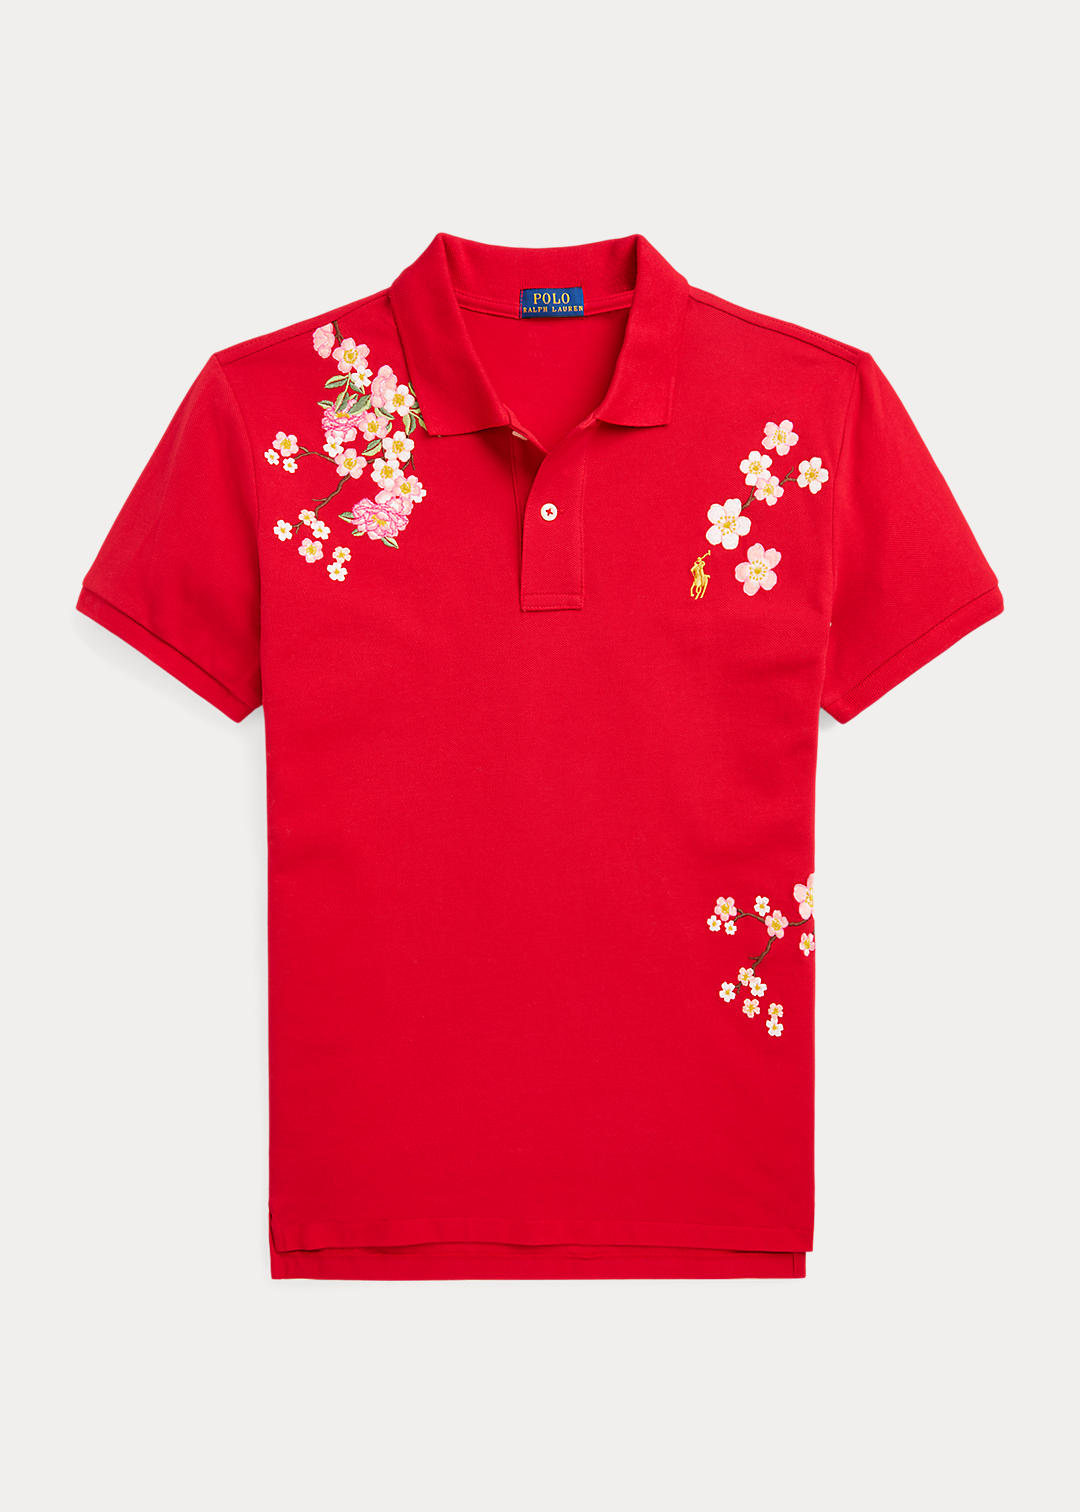 Lunar New Year Classic Fit Polo Shirt